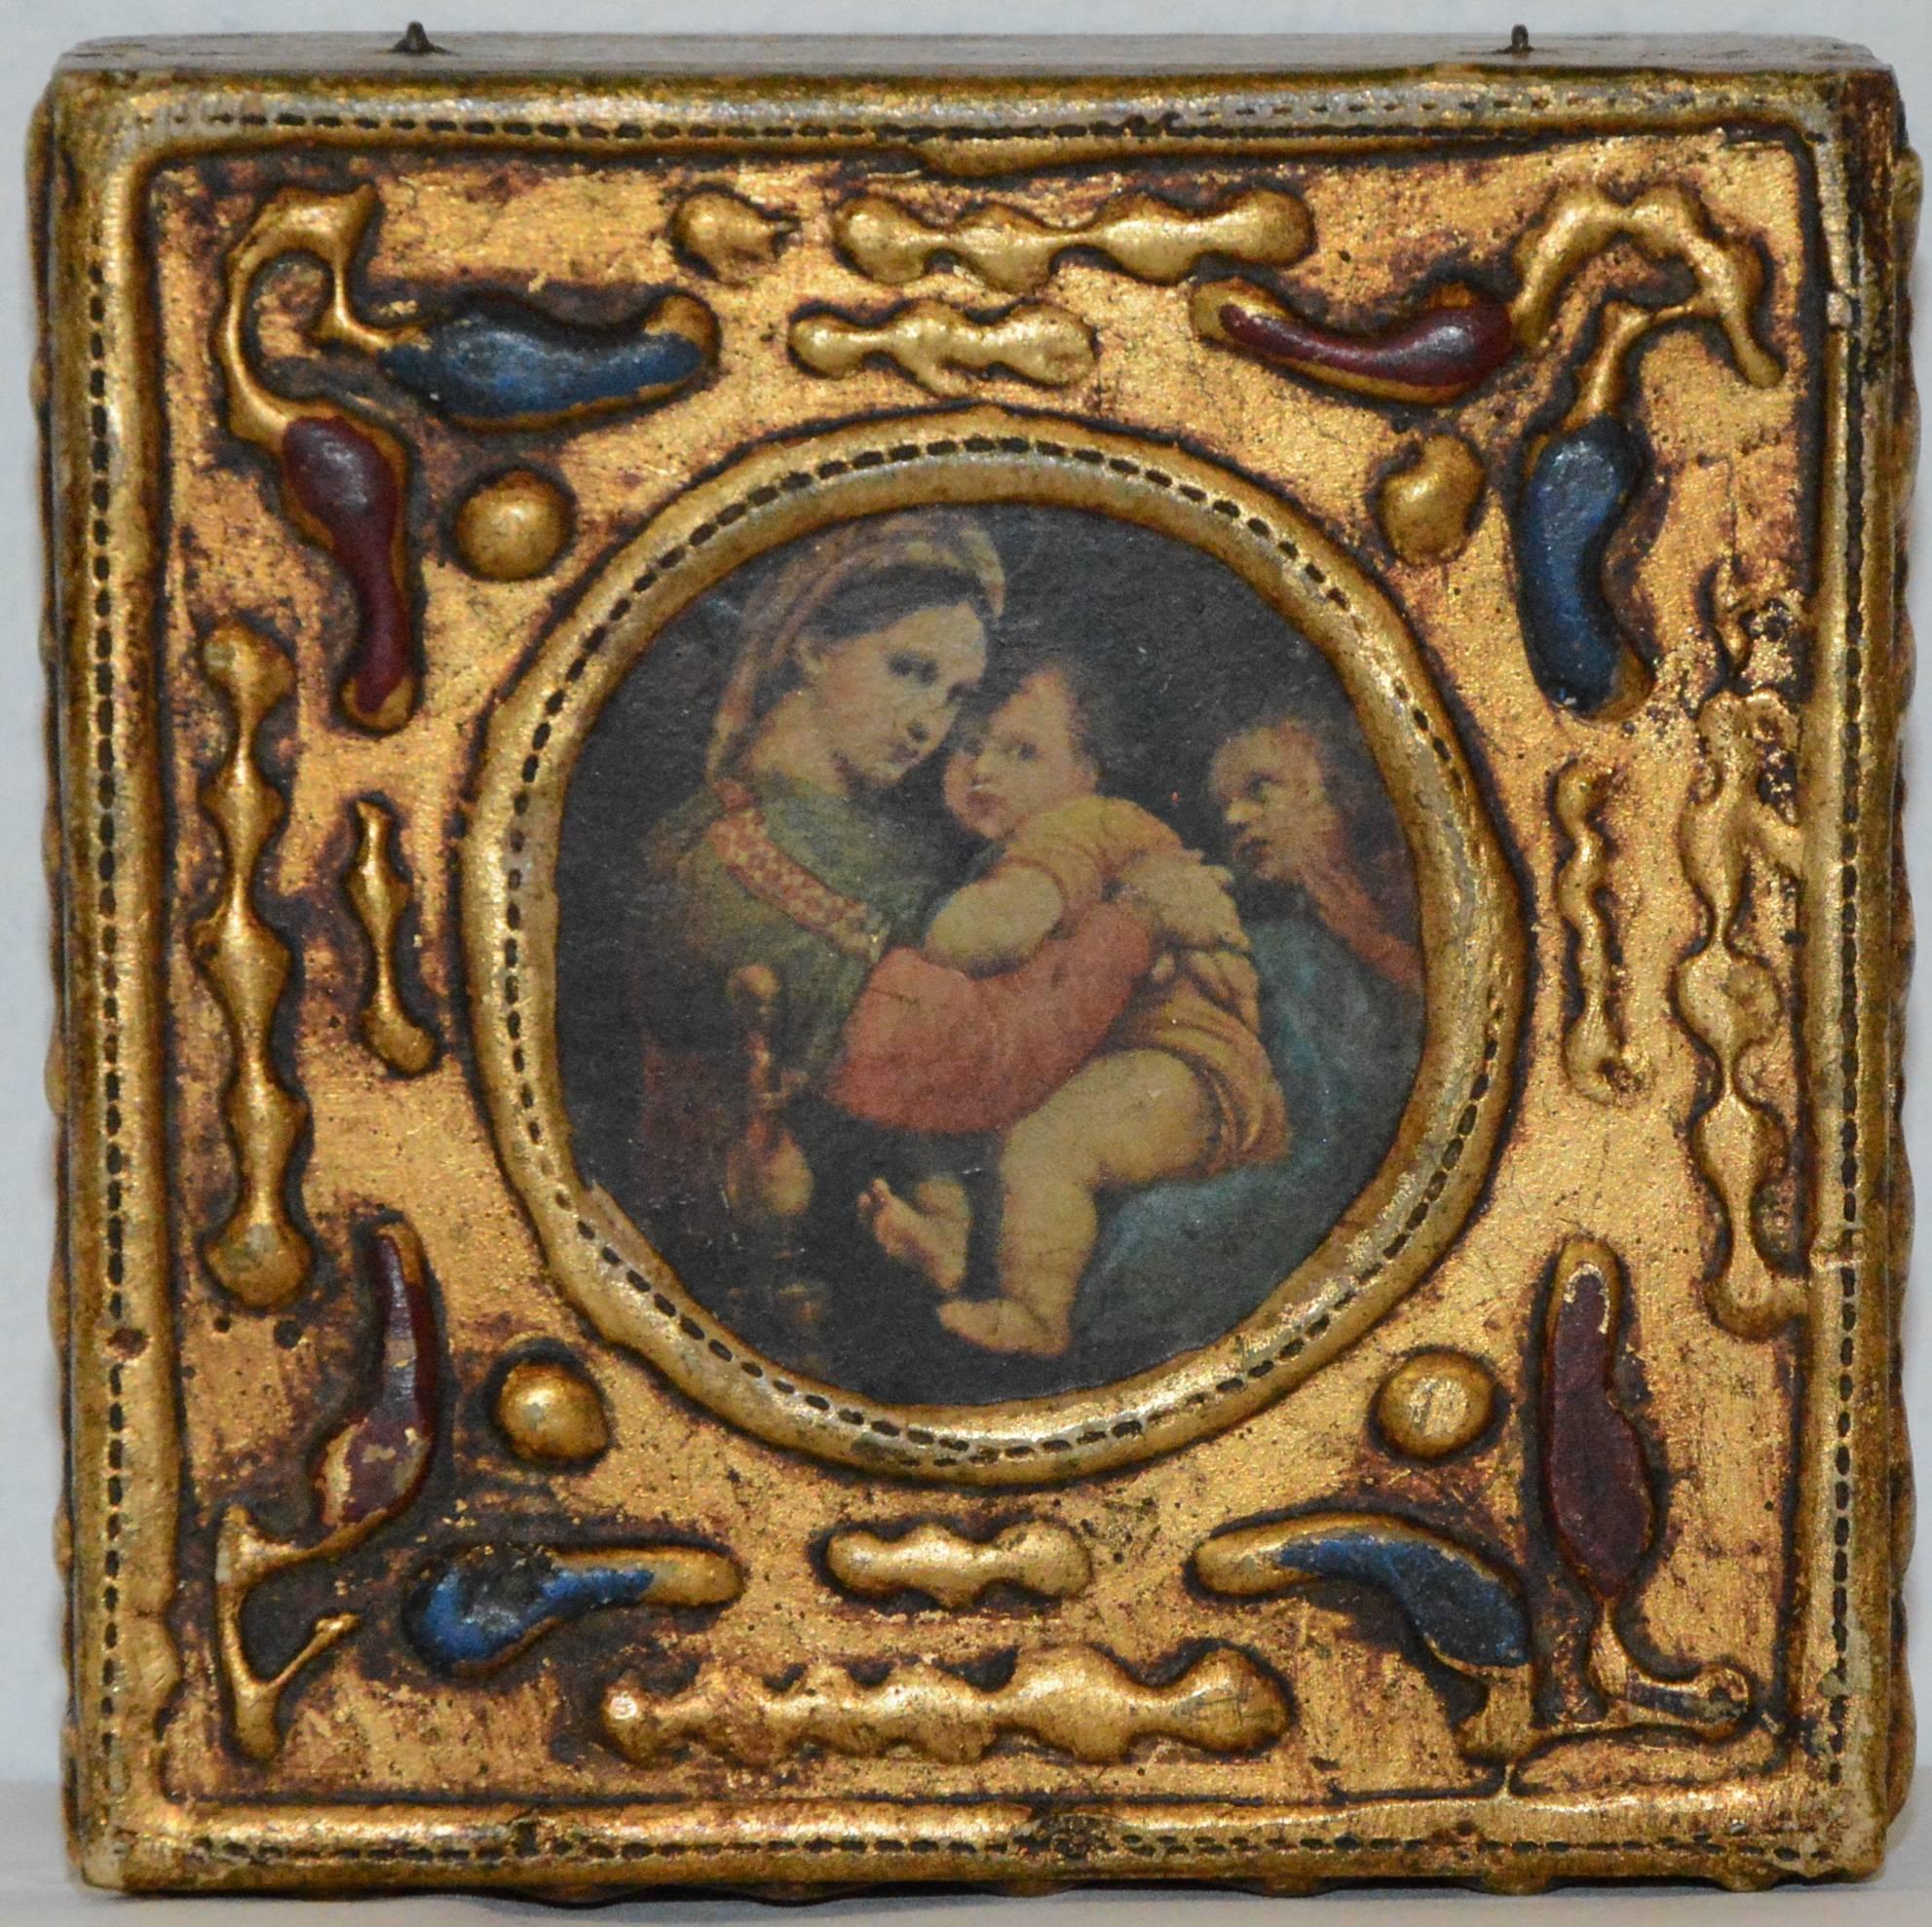 Up for your consideration is this lovingly detailed florentine box showcasing Madonna and child. The beautifully embossed box is highlighted with gold. There is a stamp on the bottom.